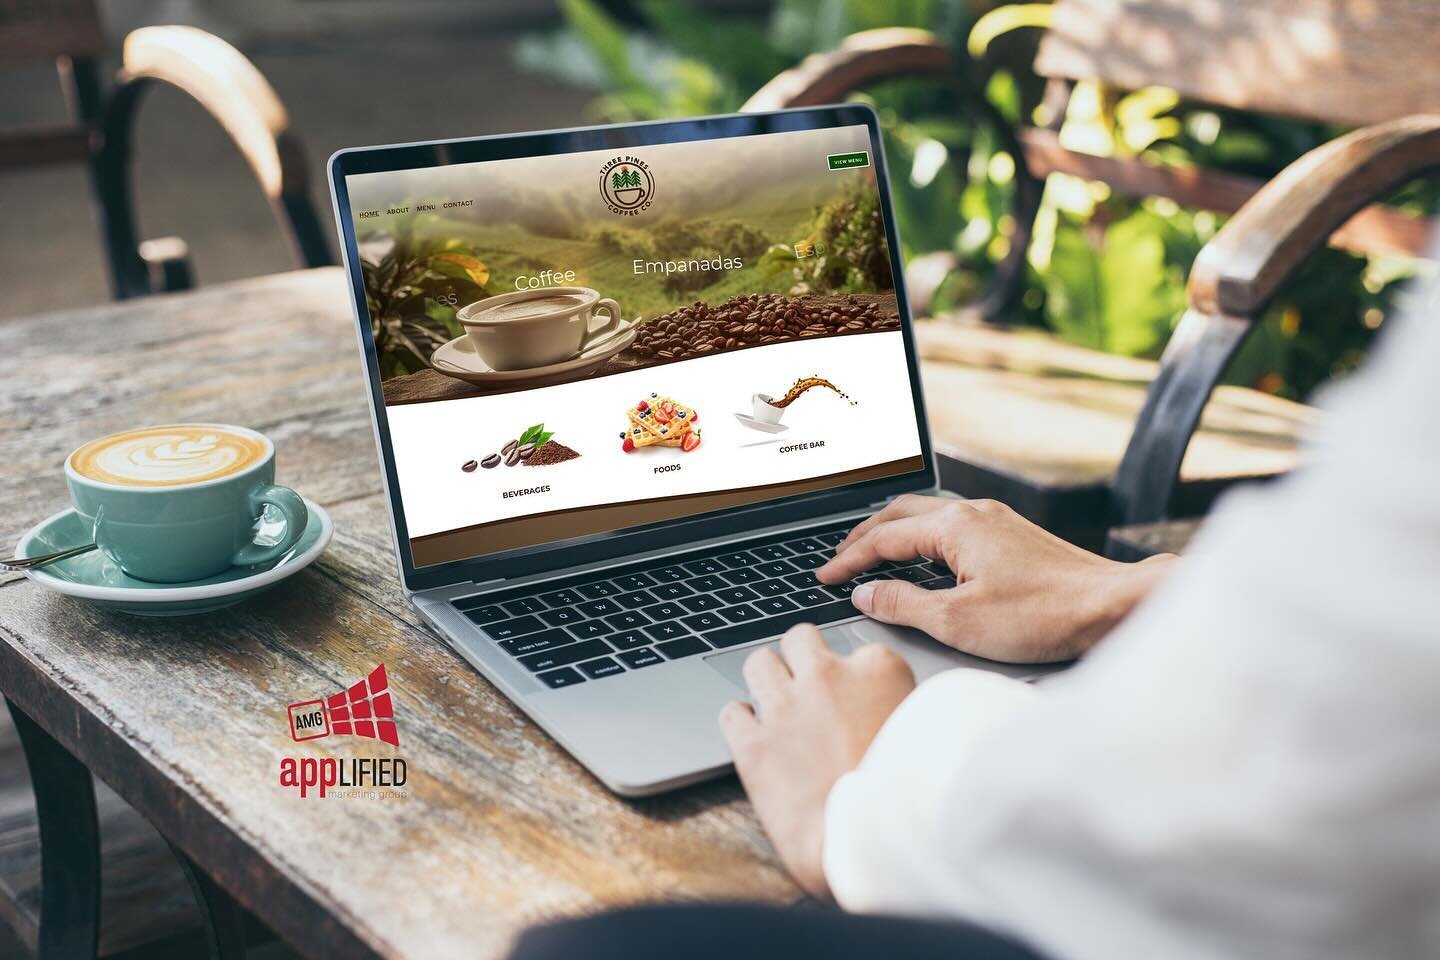 NEW! We love to see our clients expand to new business ventures and always eager to help! Opening a brand new coffee shop in South Lake Tahoe @three_pines_coffee_company approached us from scratch in need of logo, web design marketing support and mor